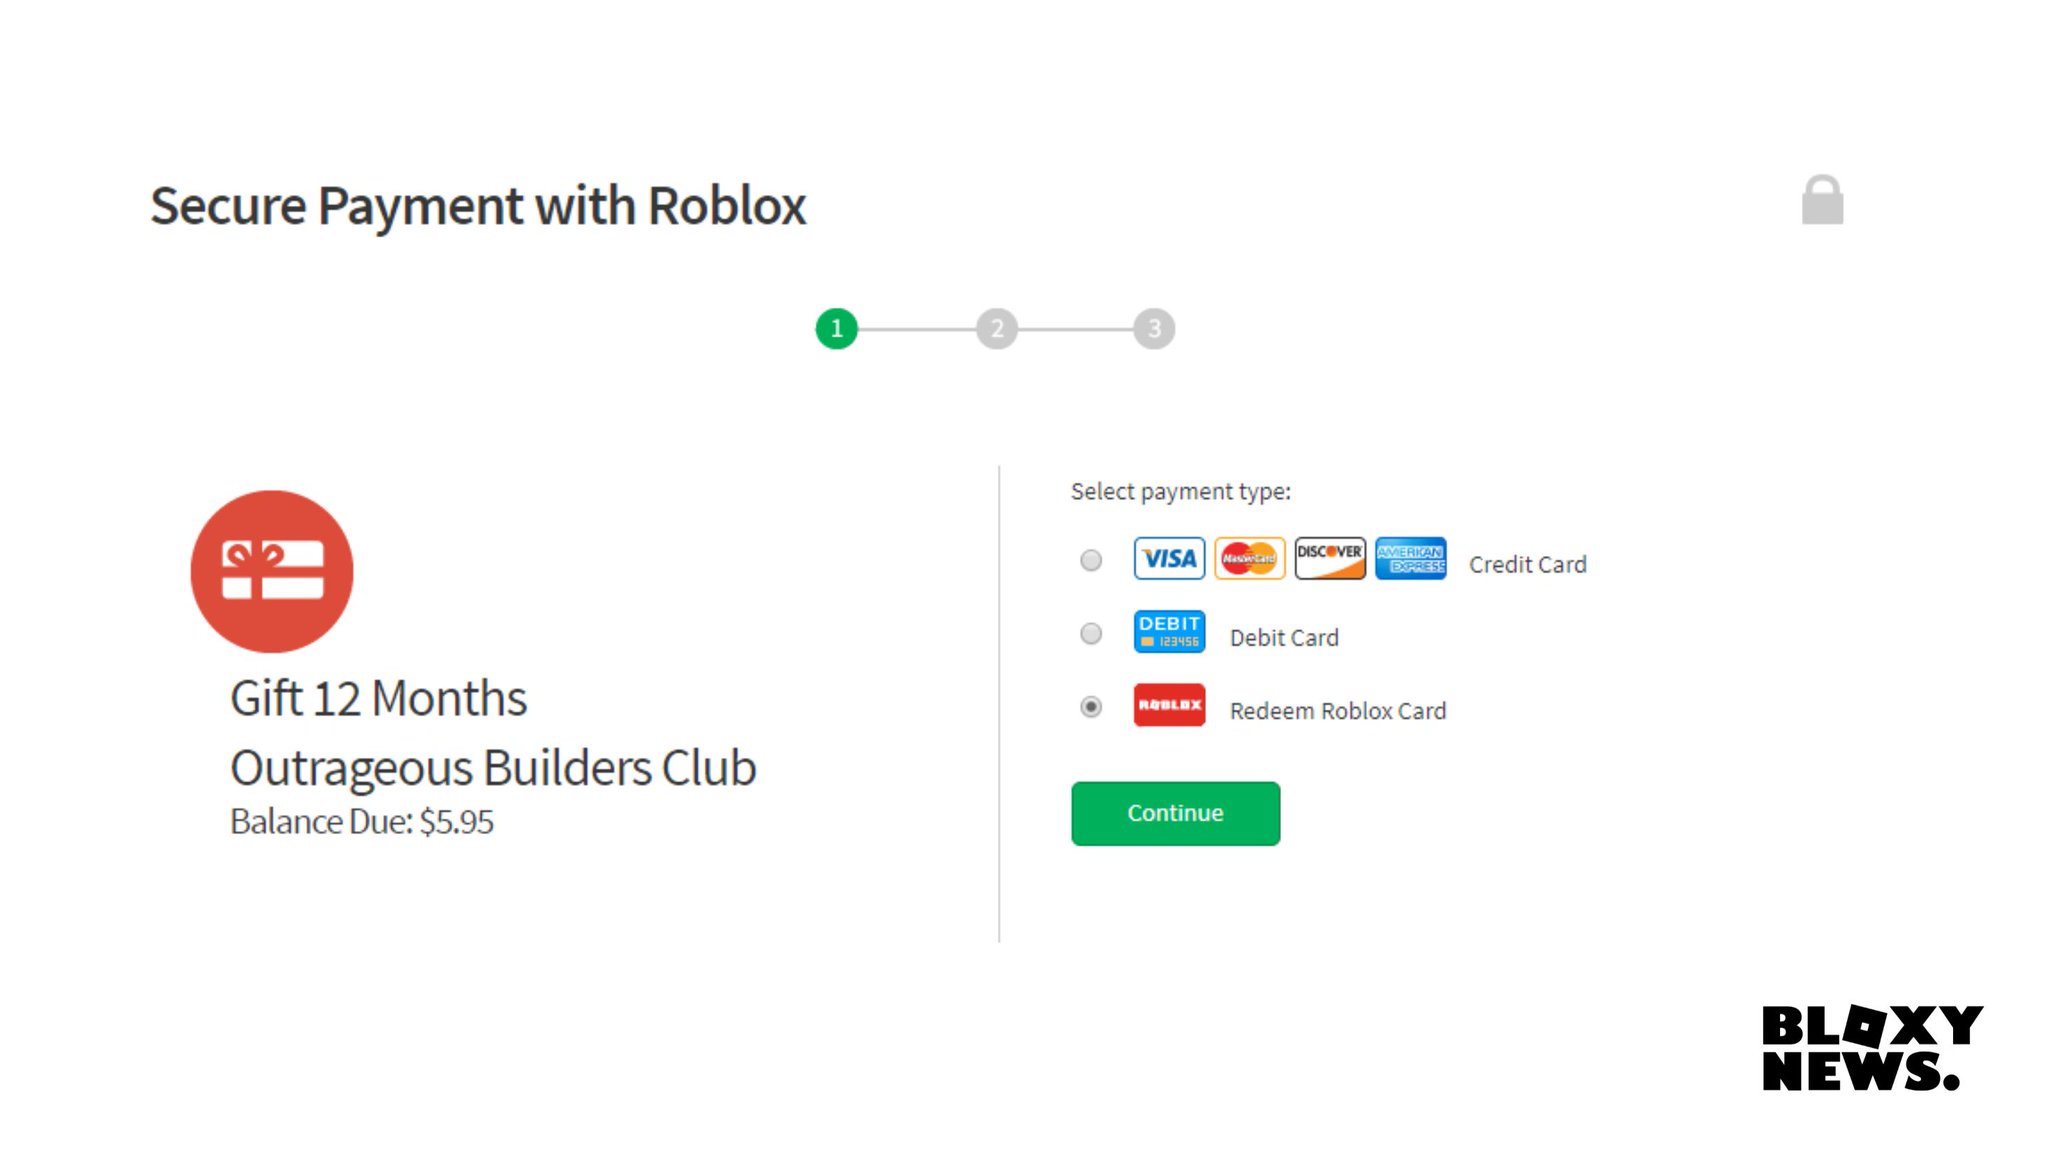 Bloxy News On Twitter Bloxynews It Appears That You Will Be Able To Gift Roblox Users Builders Club And Or Robux In The Future There Is Currently A Page For It But